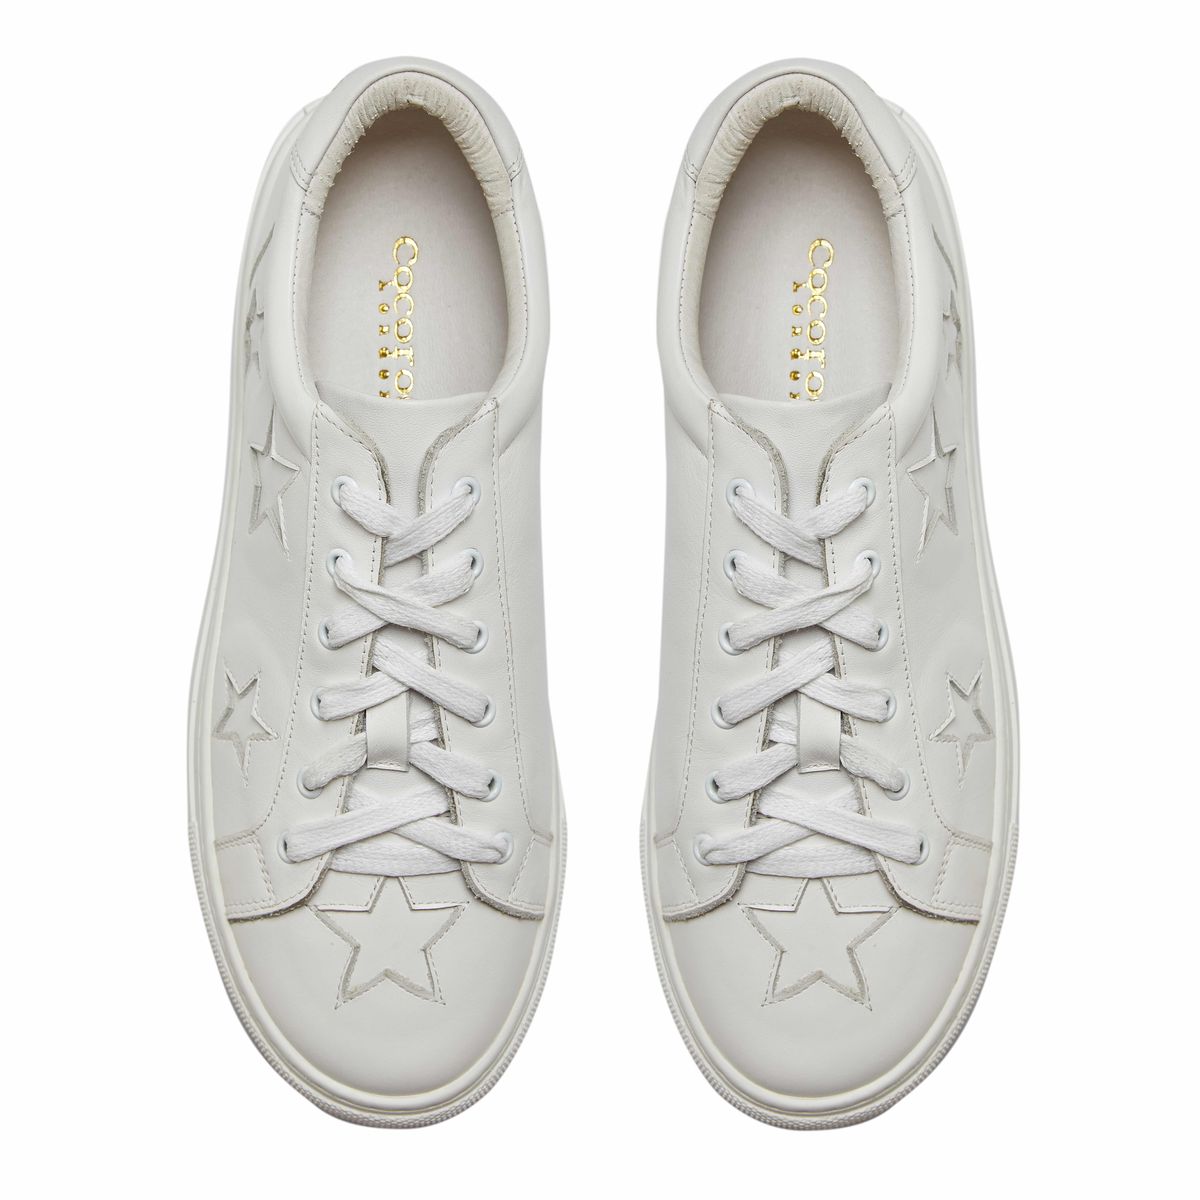 Cocorose London White with White Stars comfort trainers